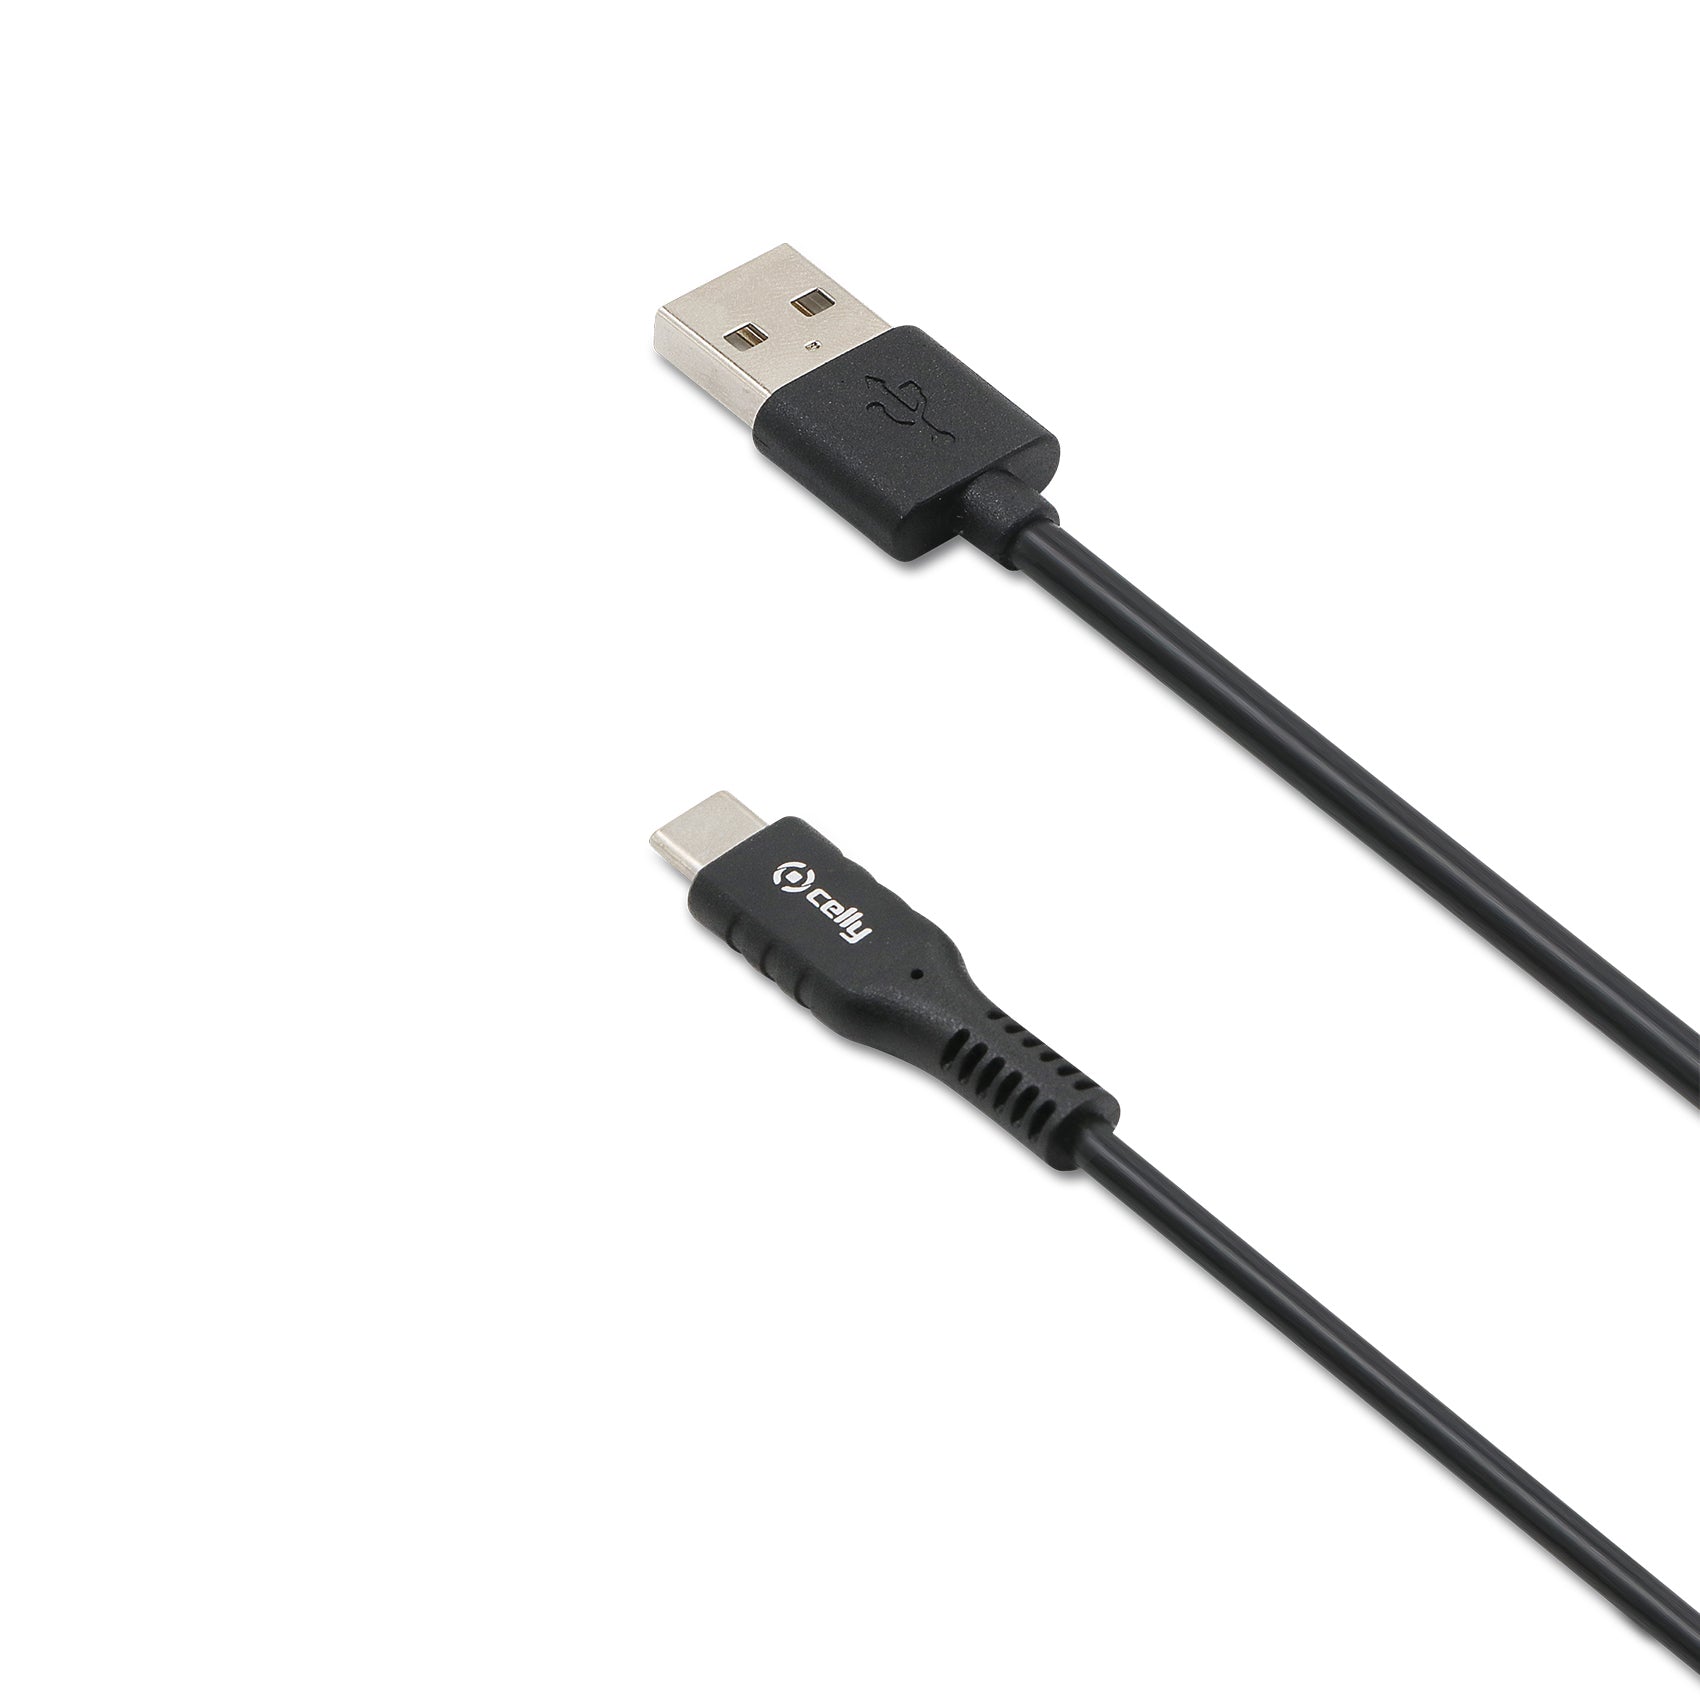 USB-A TO USB-C 15W CABLE 3MT BLACK